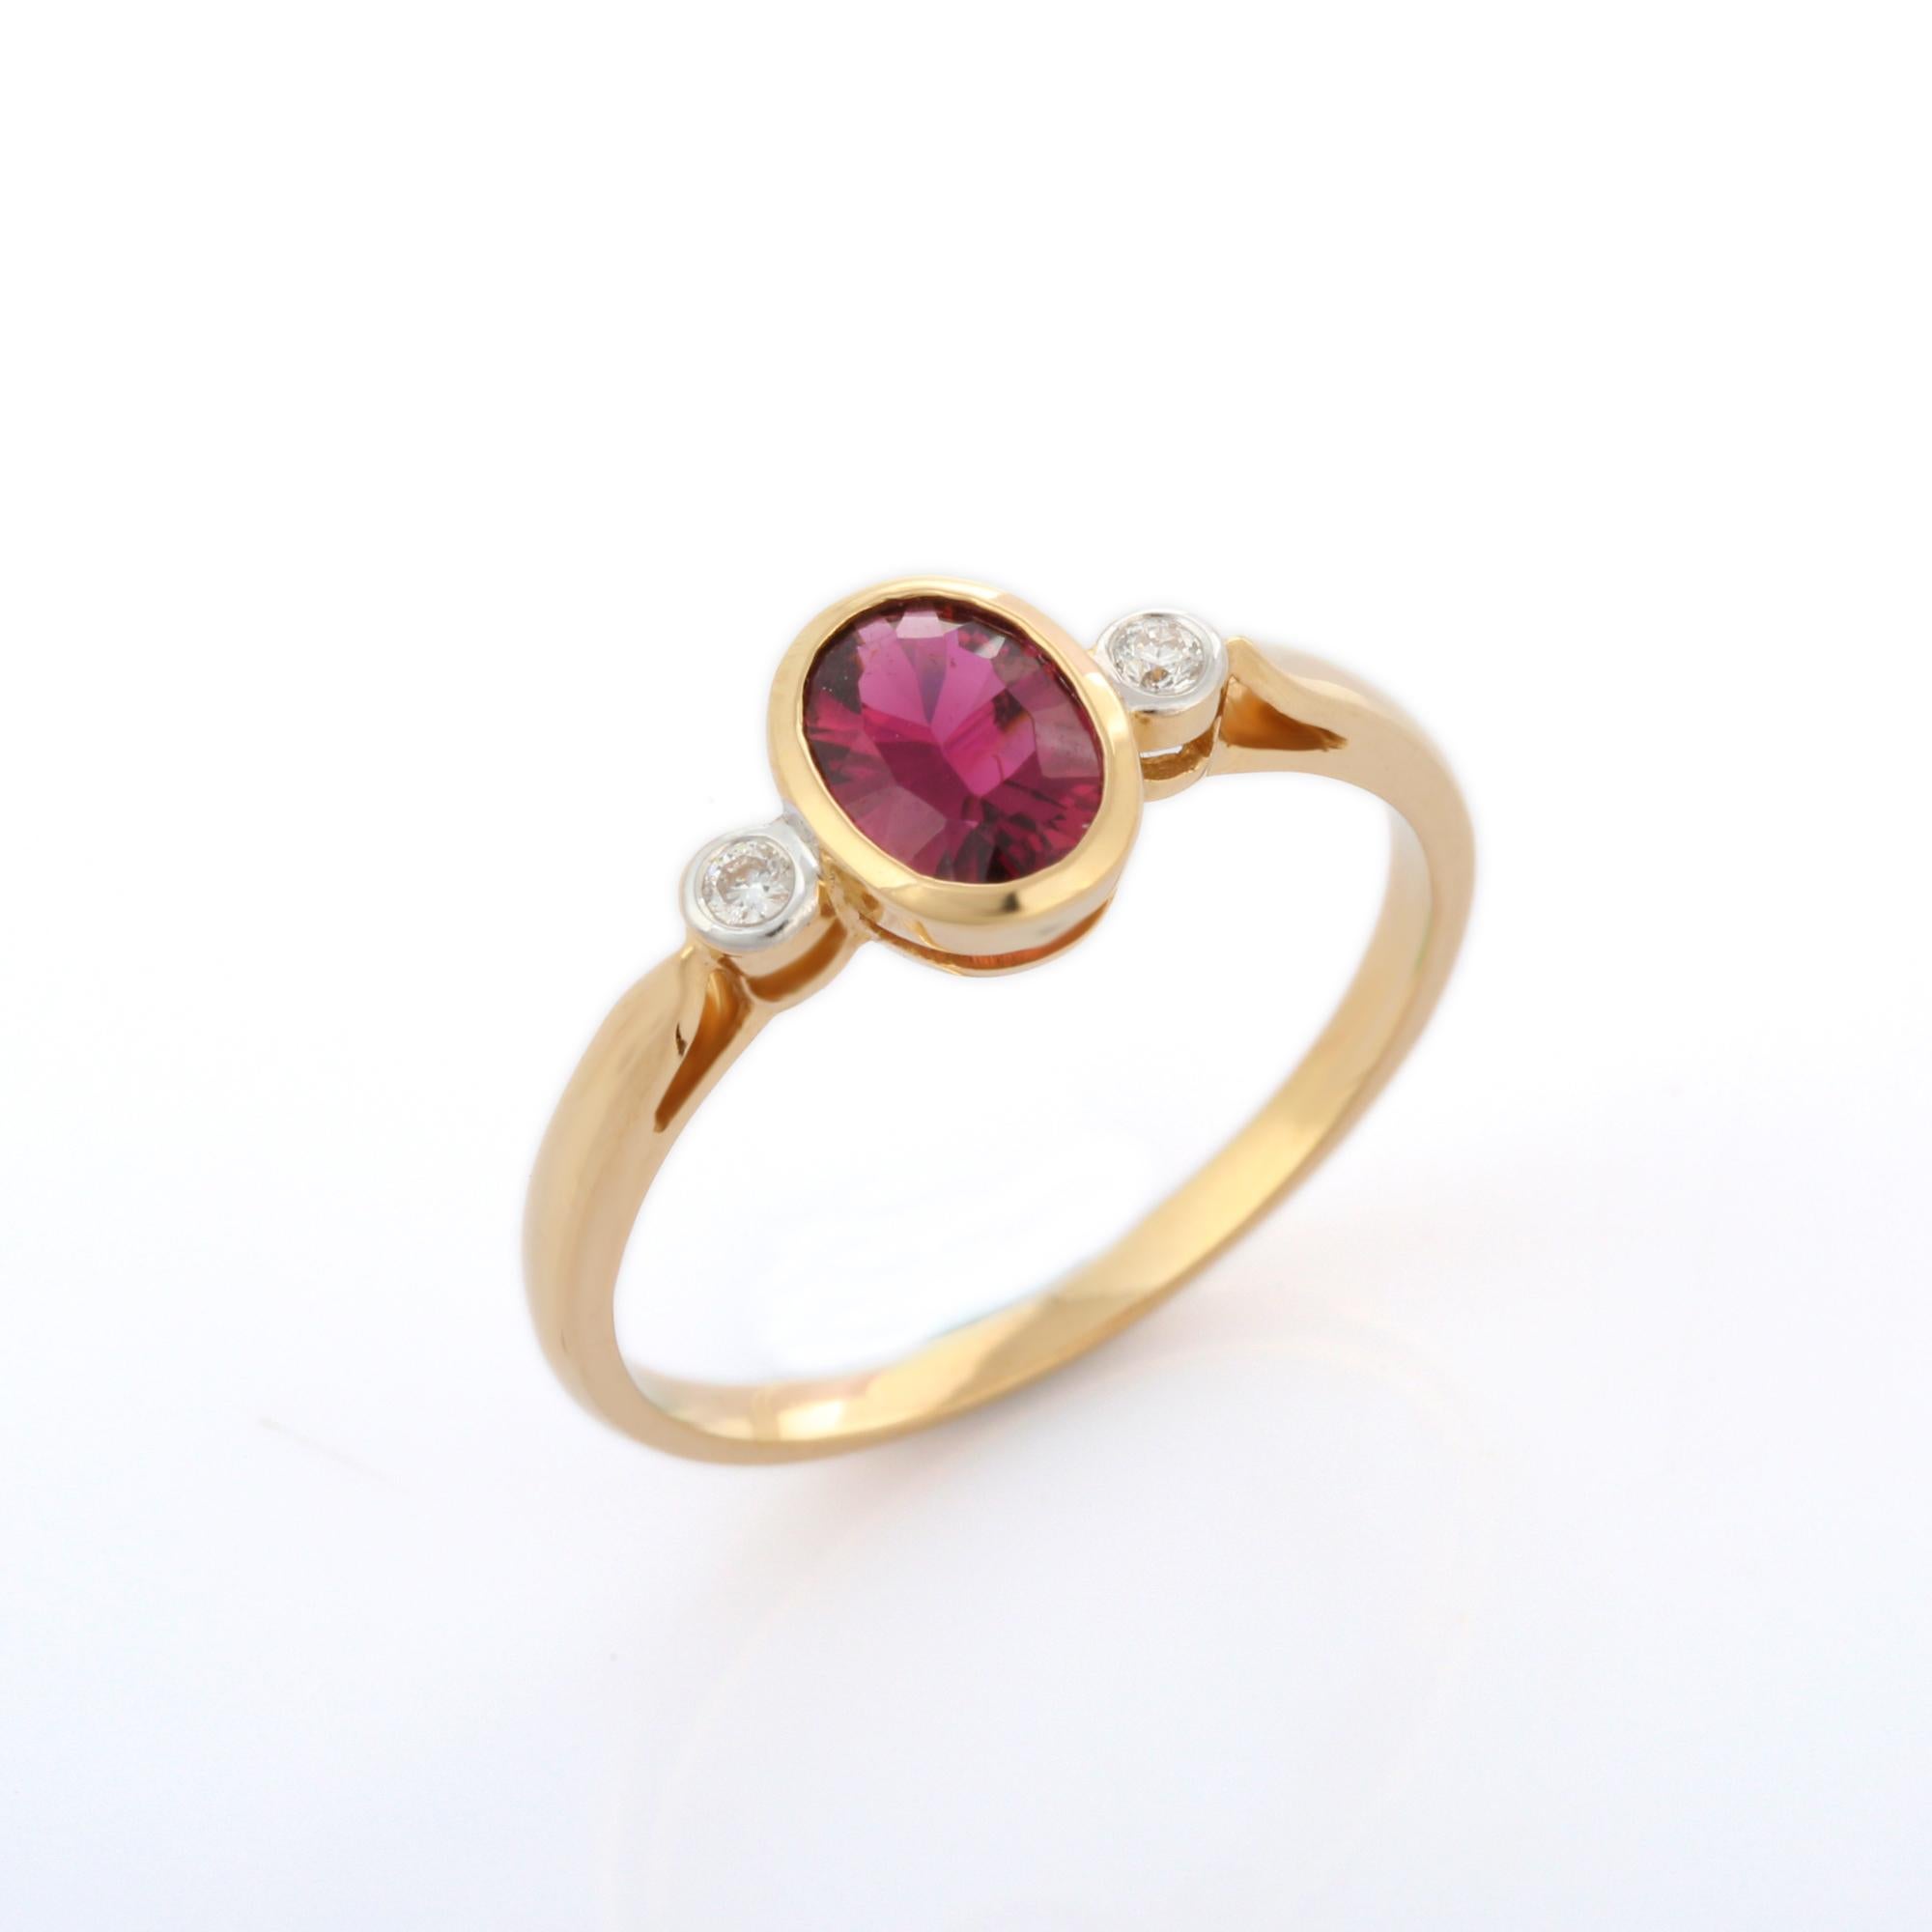 For Sale:  Three Stone Tourmaline Ring with Diamond in 18K Solid Yellow Gold 6